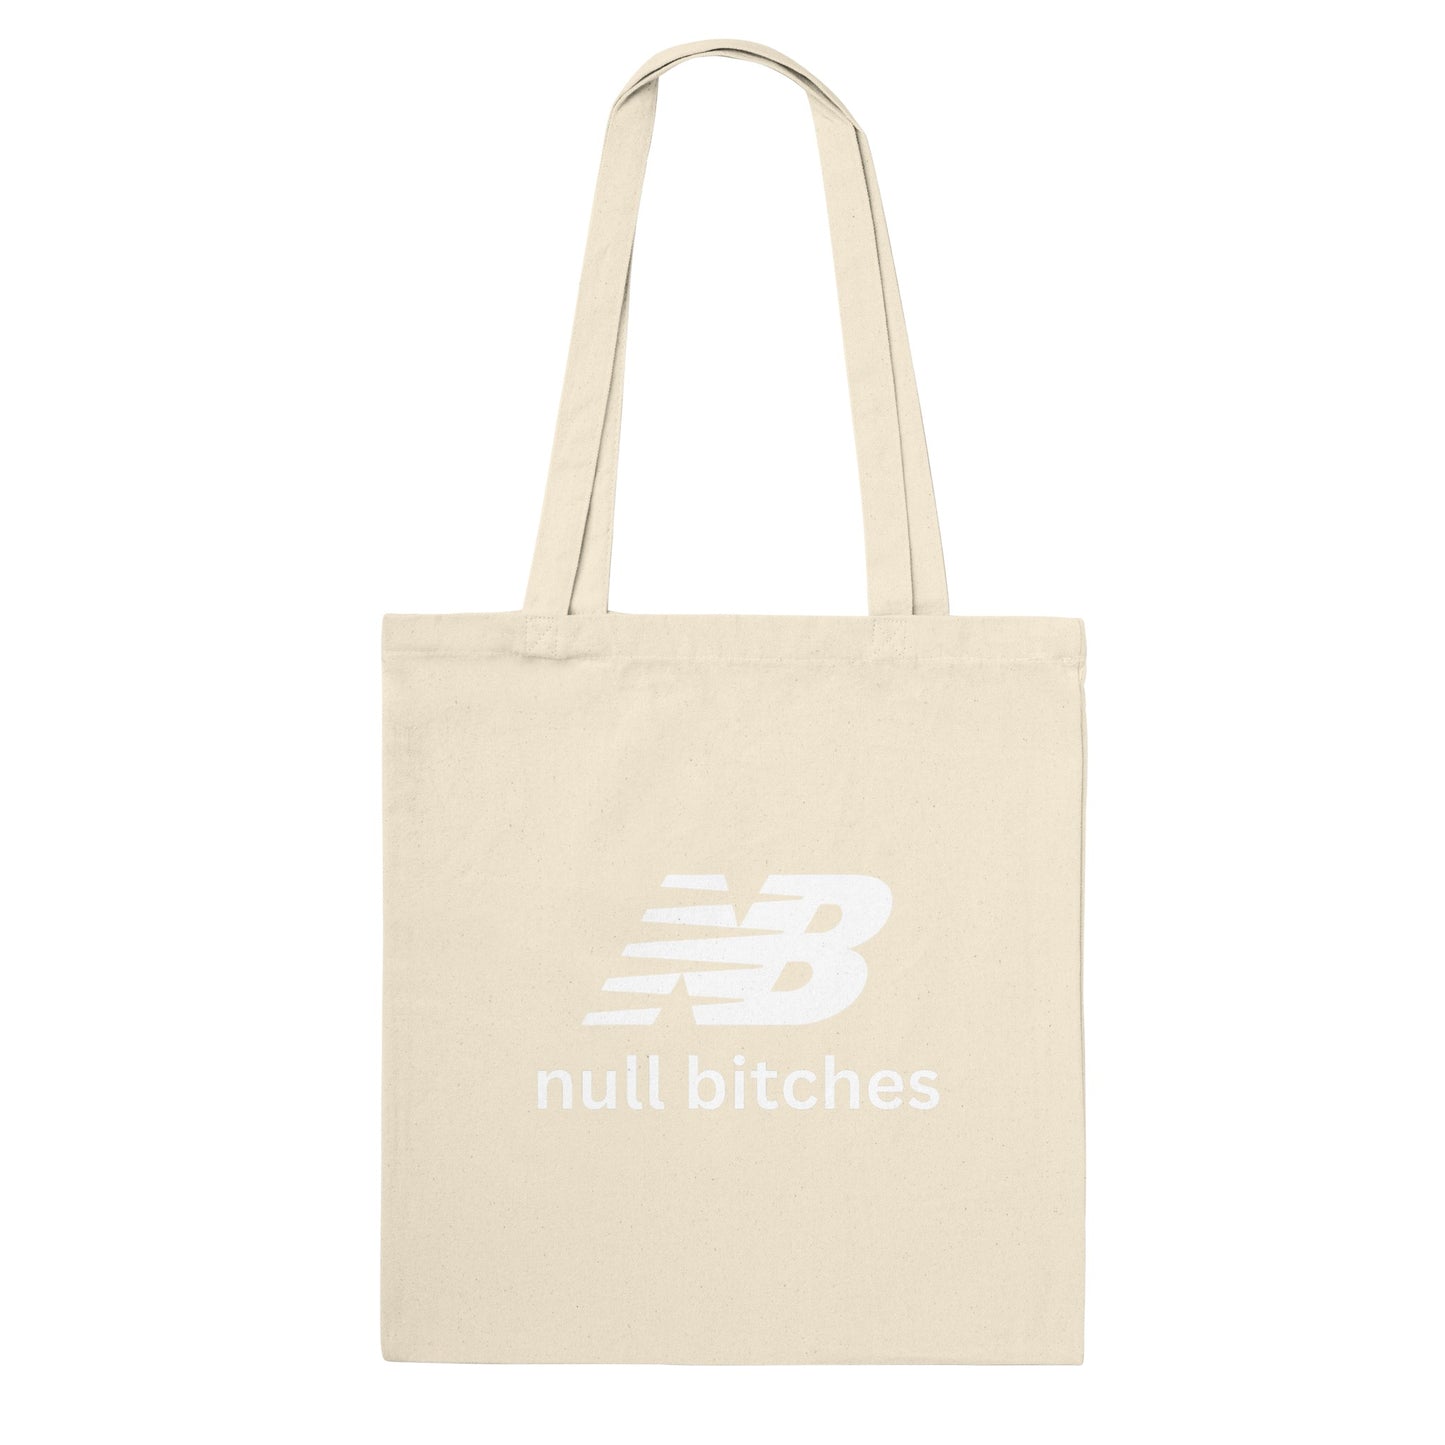 Null Bitches Tote Bag